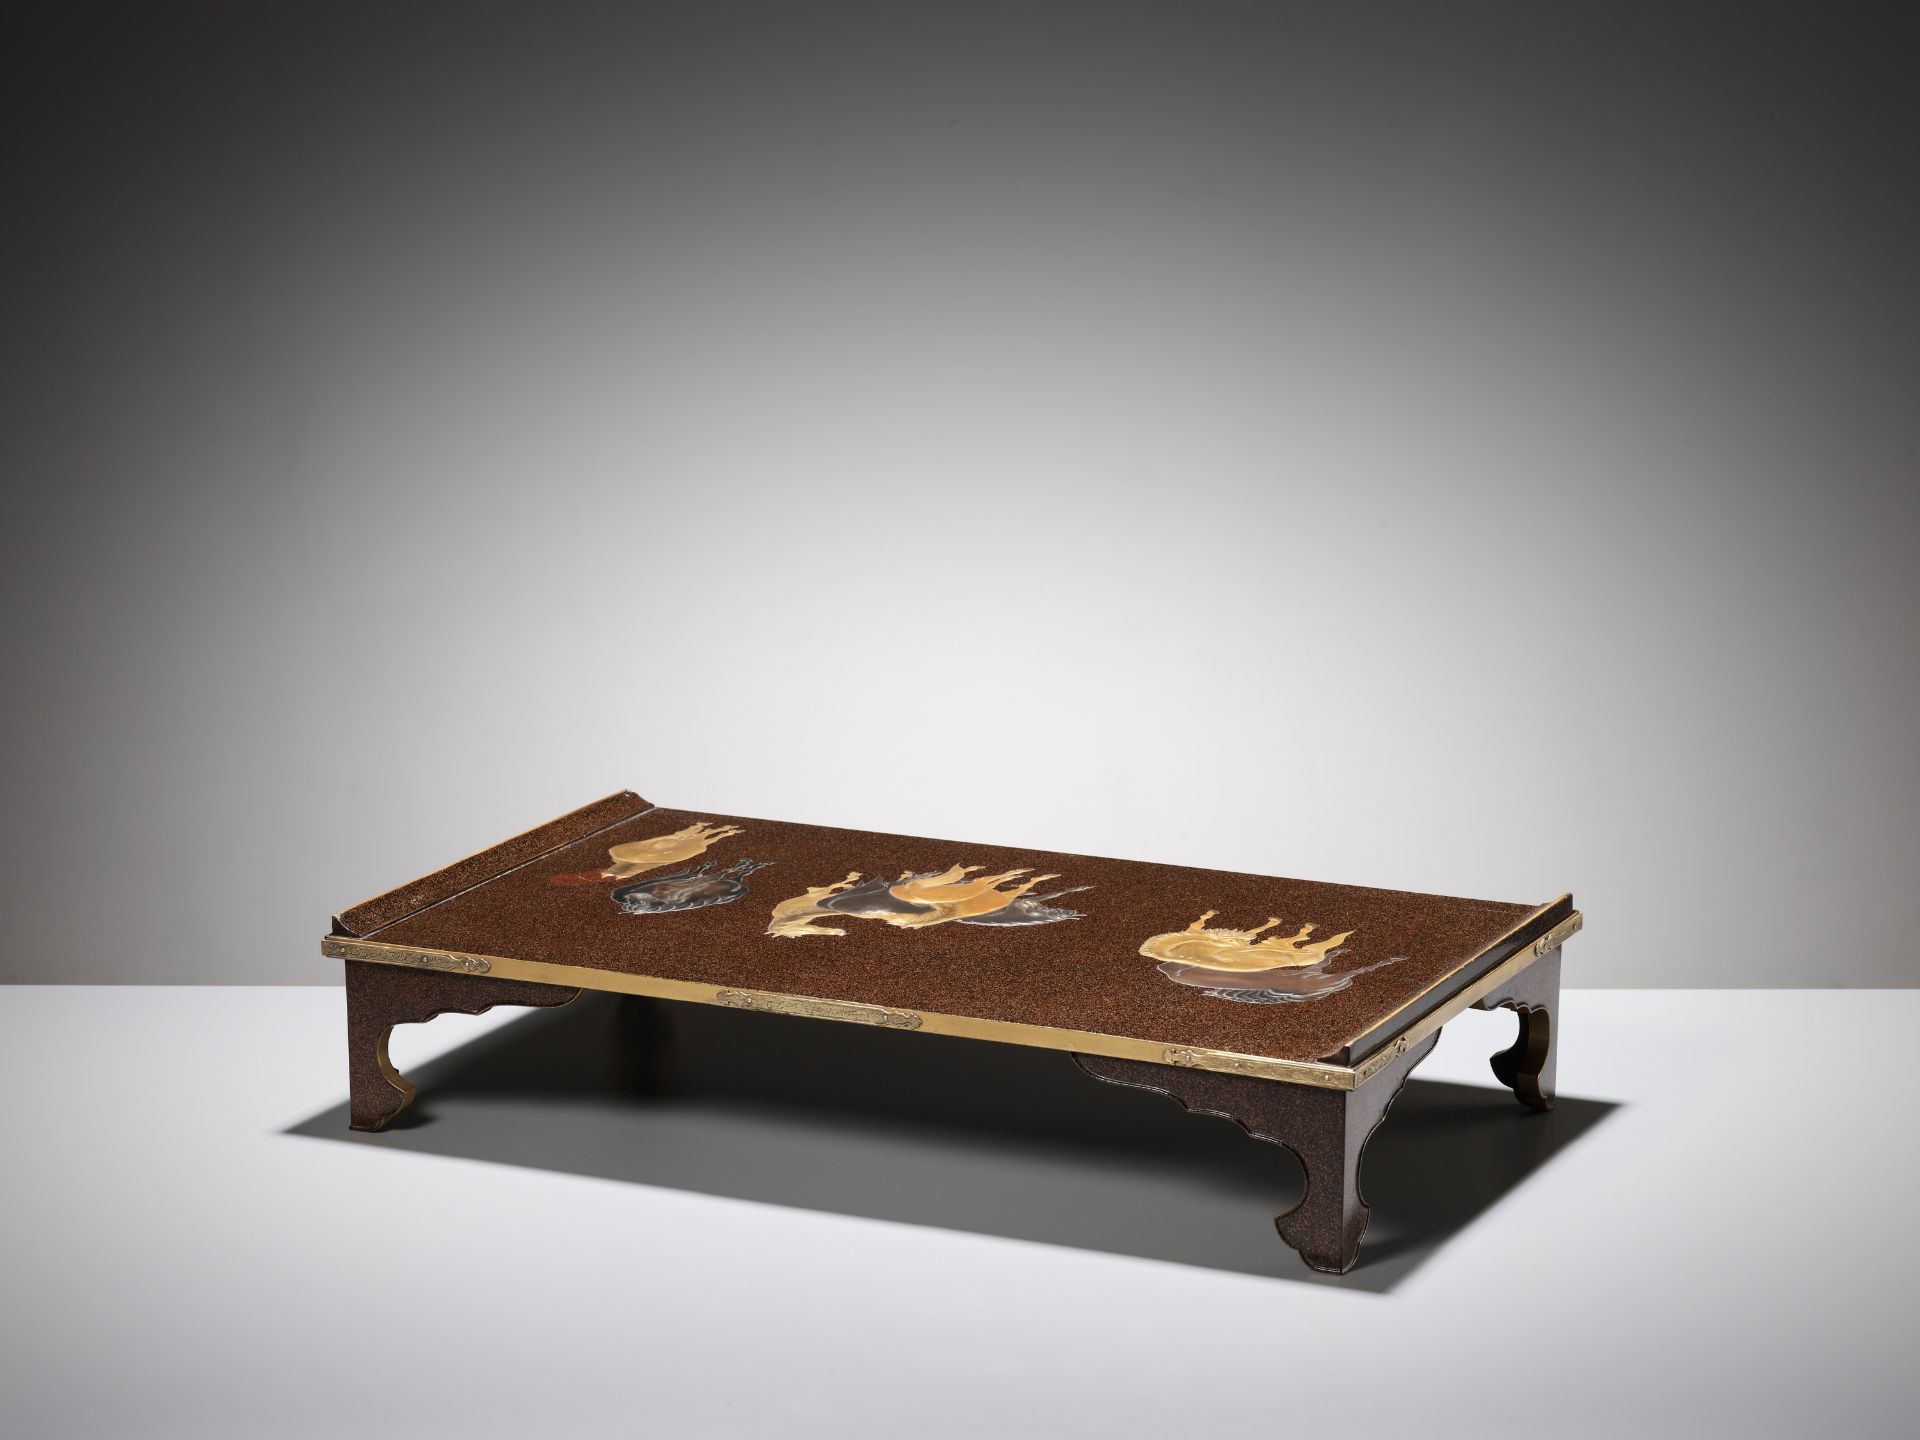 A RARE AND FINE LACQUER BUNDAI (WRITING TABLE) WITH SEVEN HORSES - Image 6 of 8